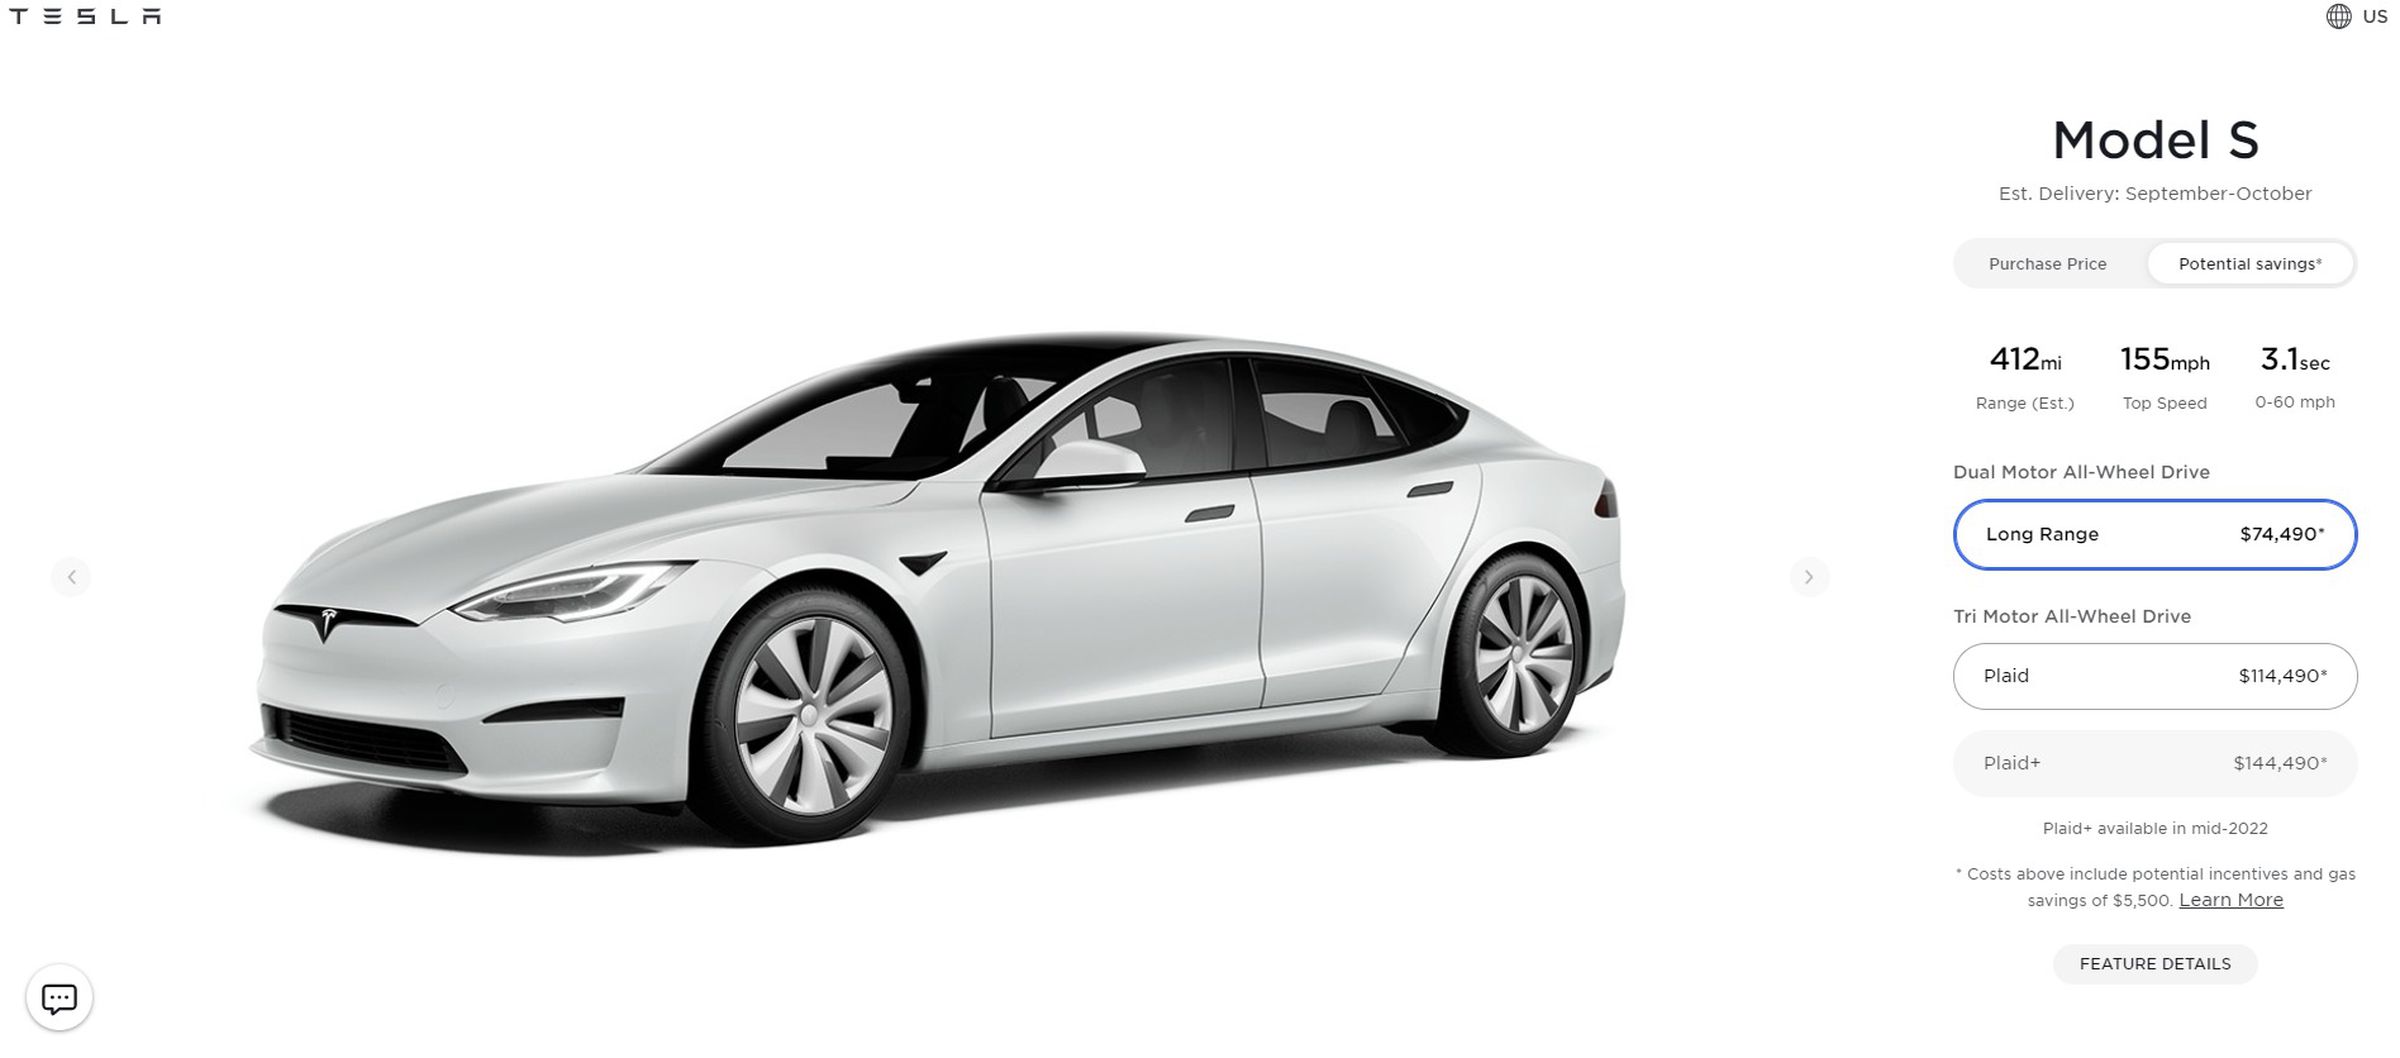 The Plaid Plus doesn’t appear to be an option on Tesla’s website